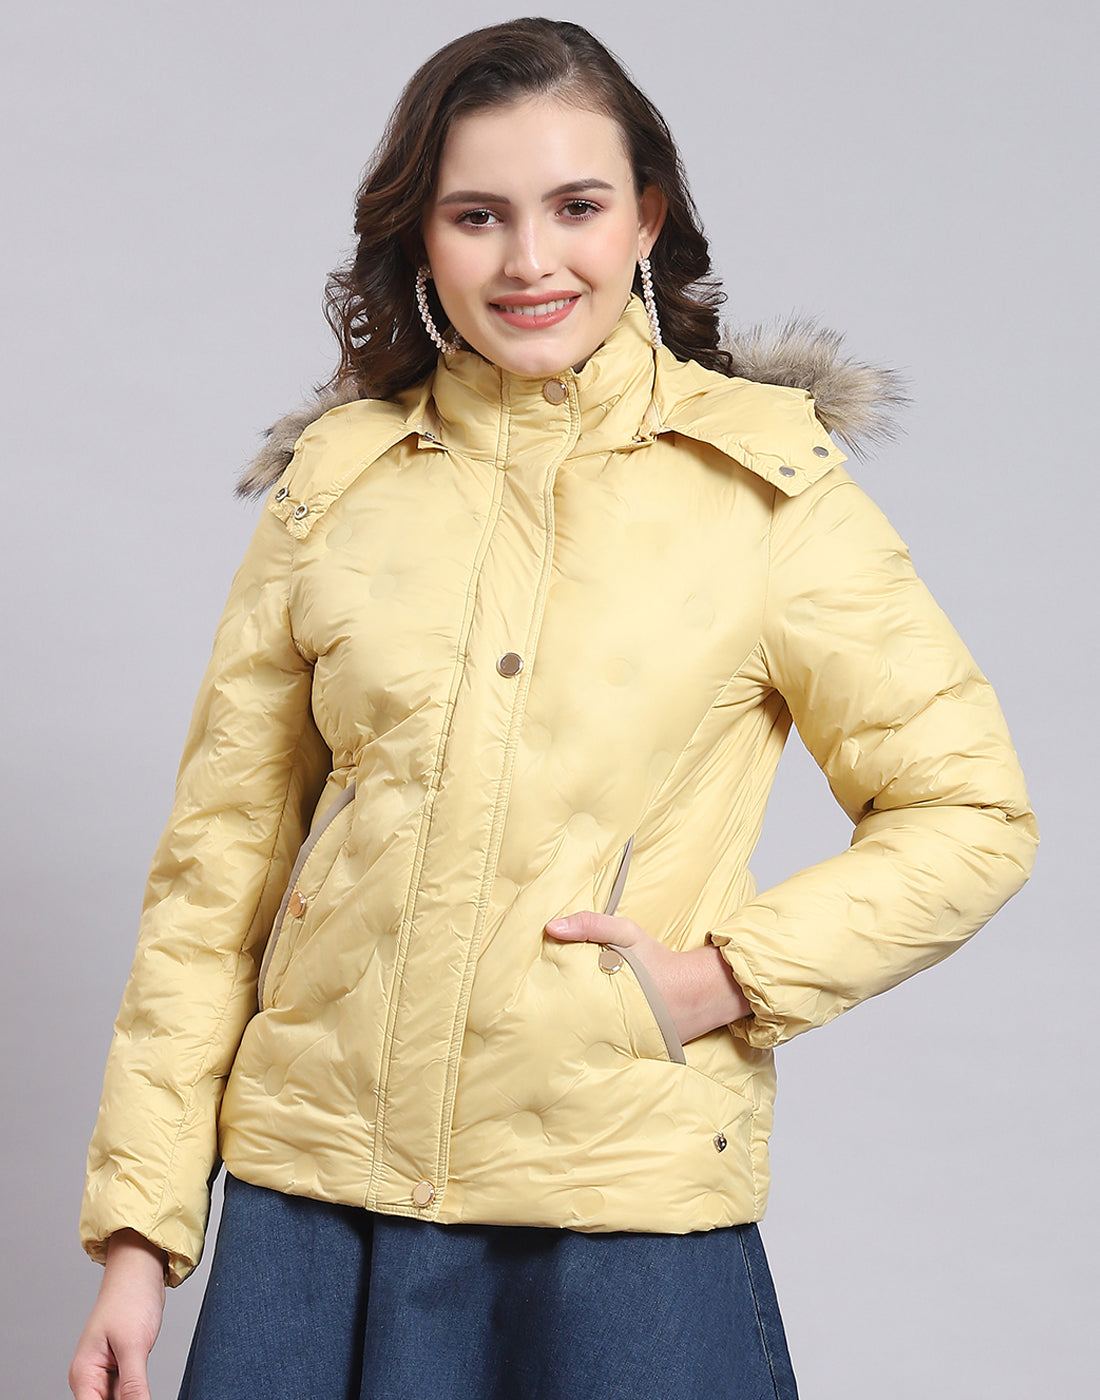 Ladies or Mens Hamilton Jacket - ZDI - Safety PPE, Uniforms and Gifts  Wholesaler